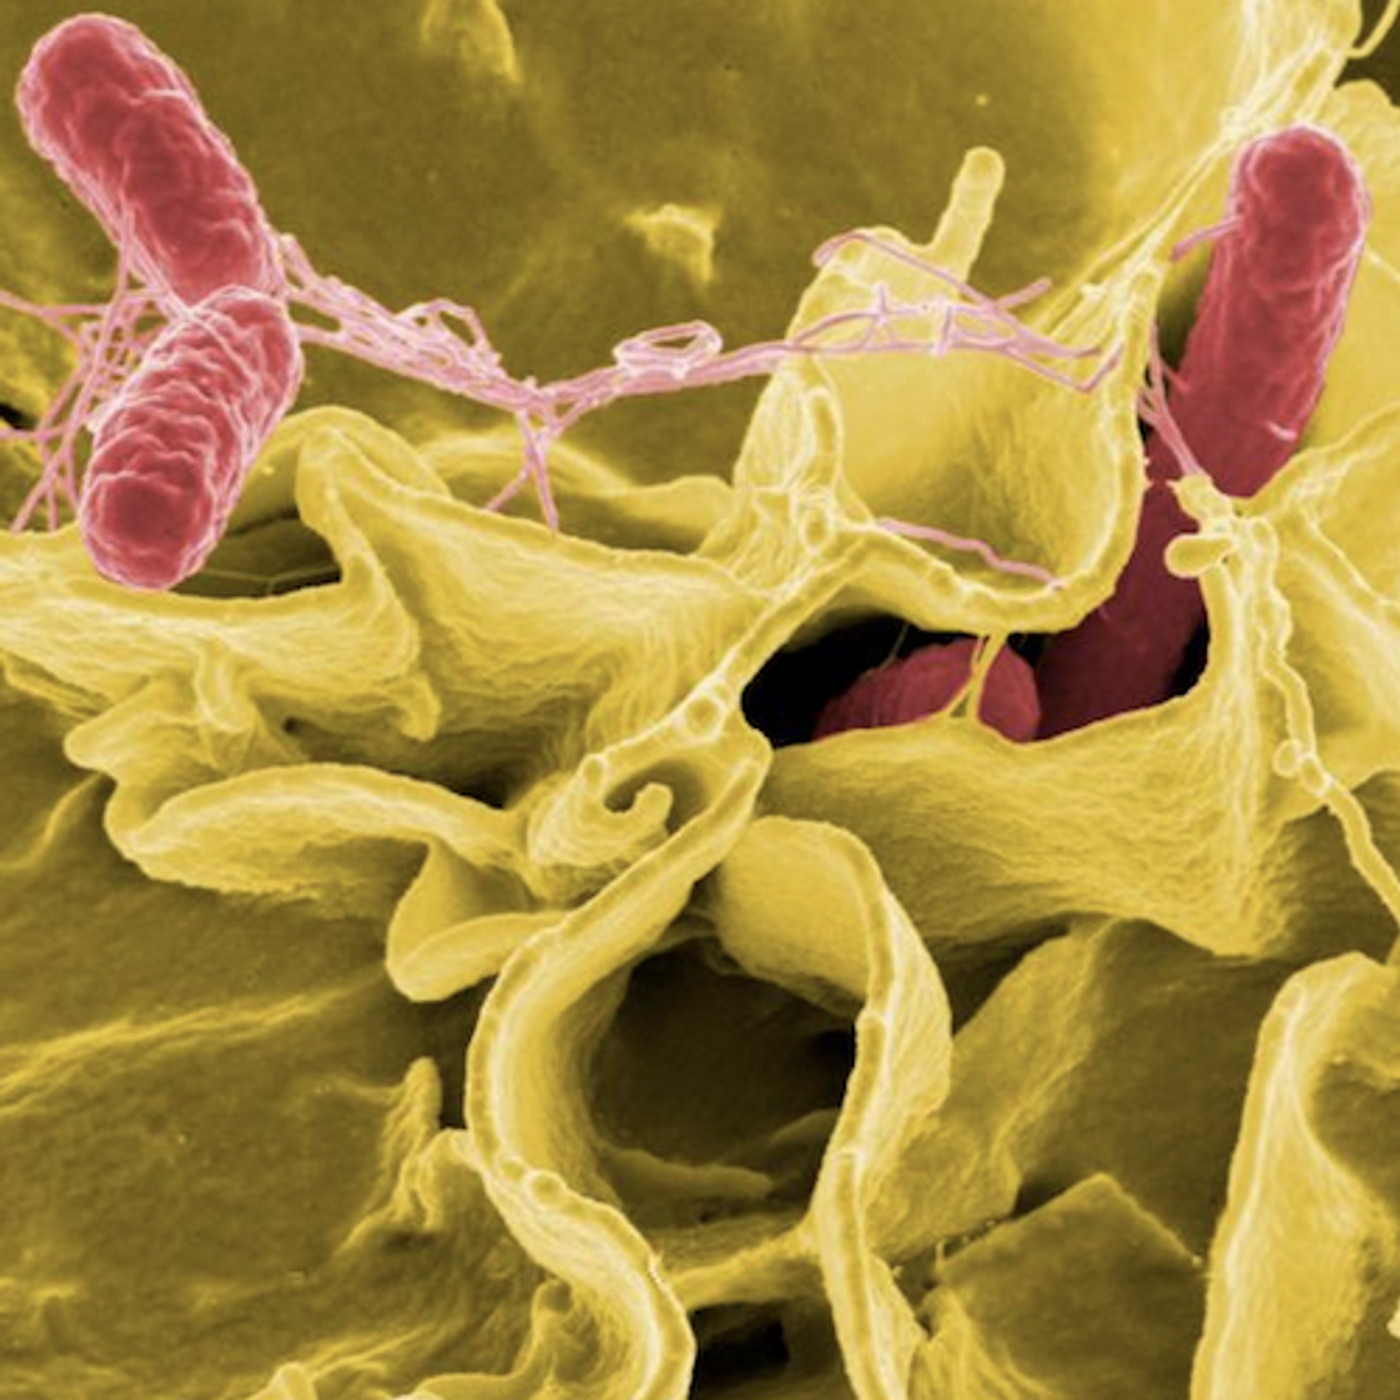 Salmonella bacteria, a common cause of foodborne disease, invade an immune cell. / Credit: NIAID